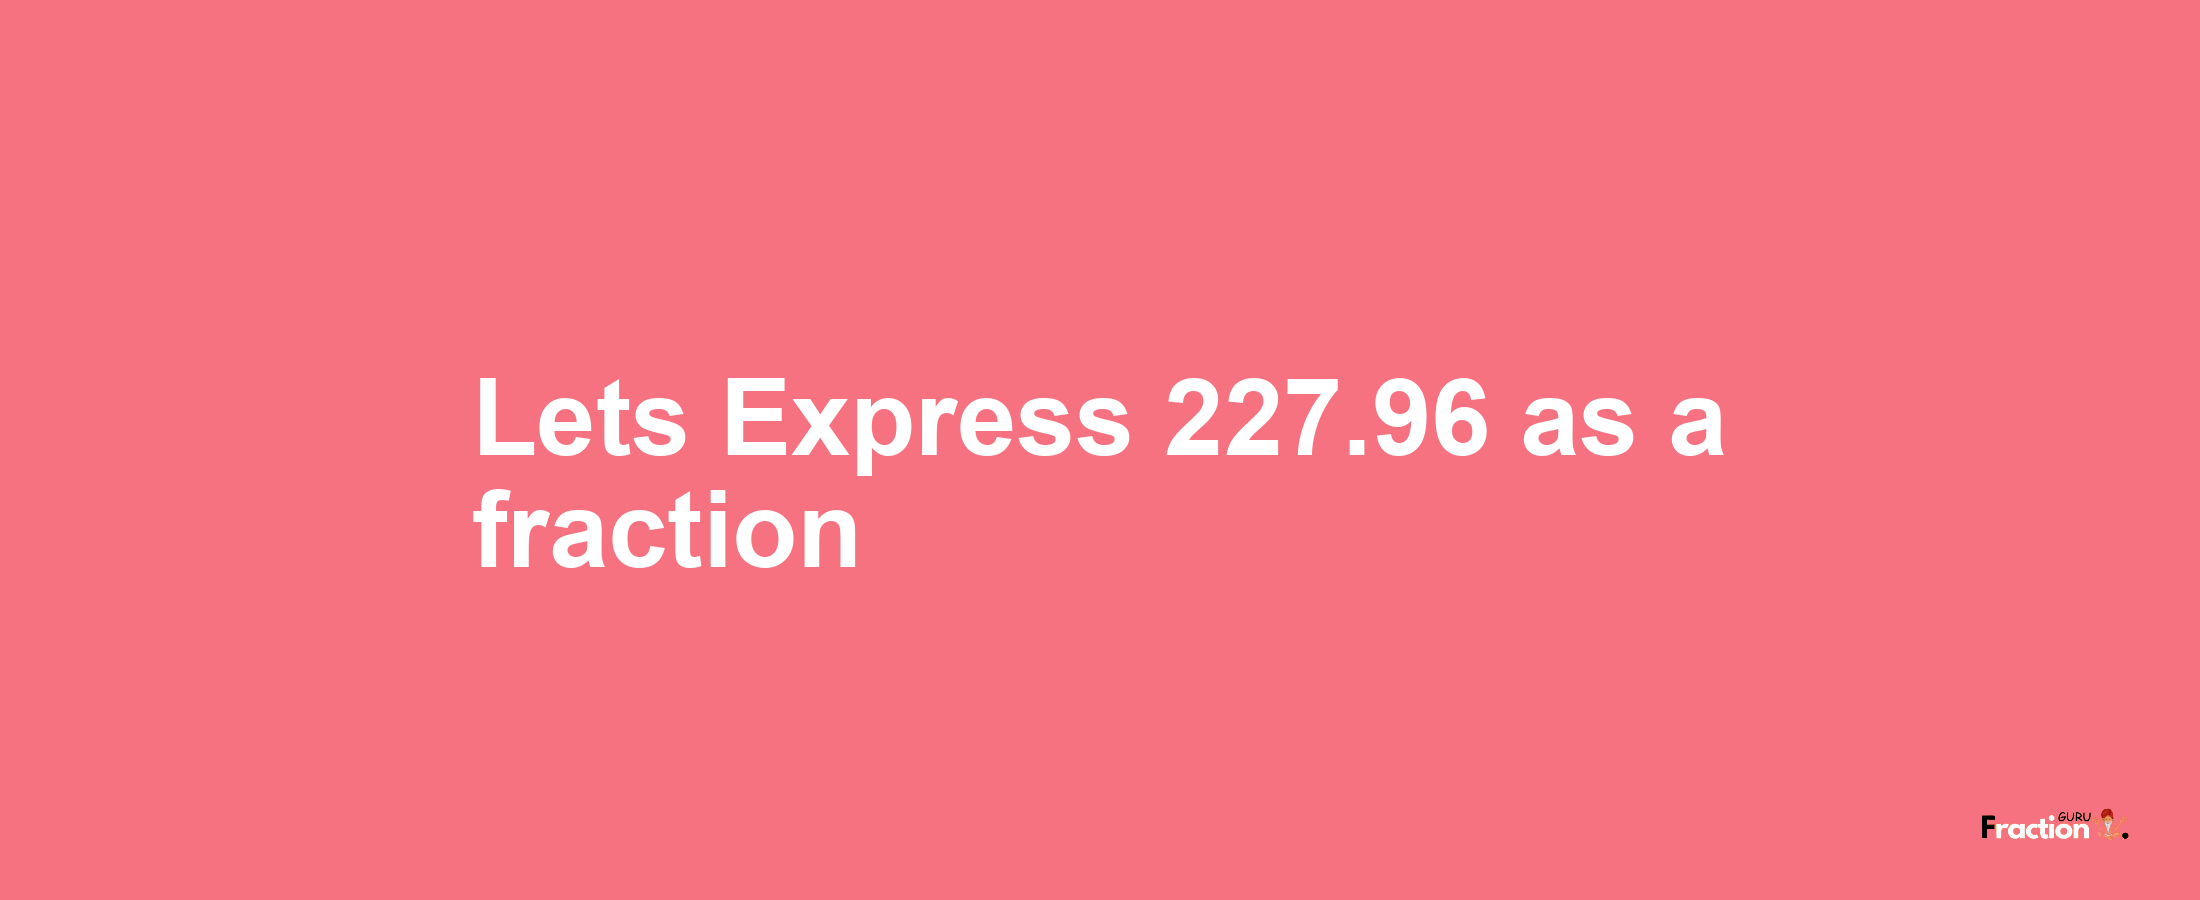 Lets Express 227.96 as afraction